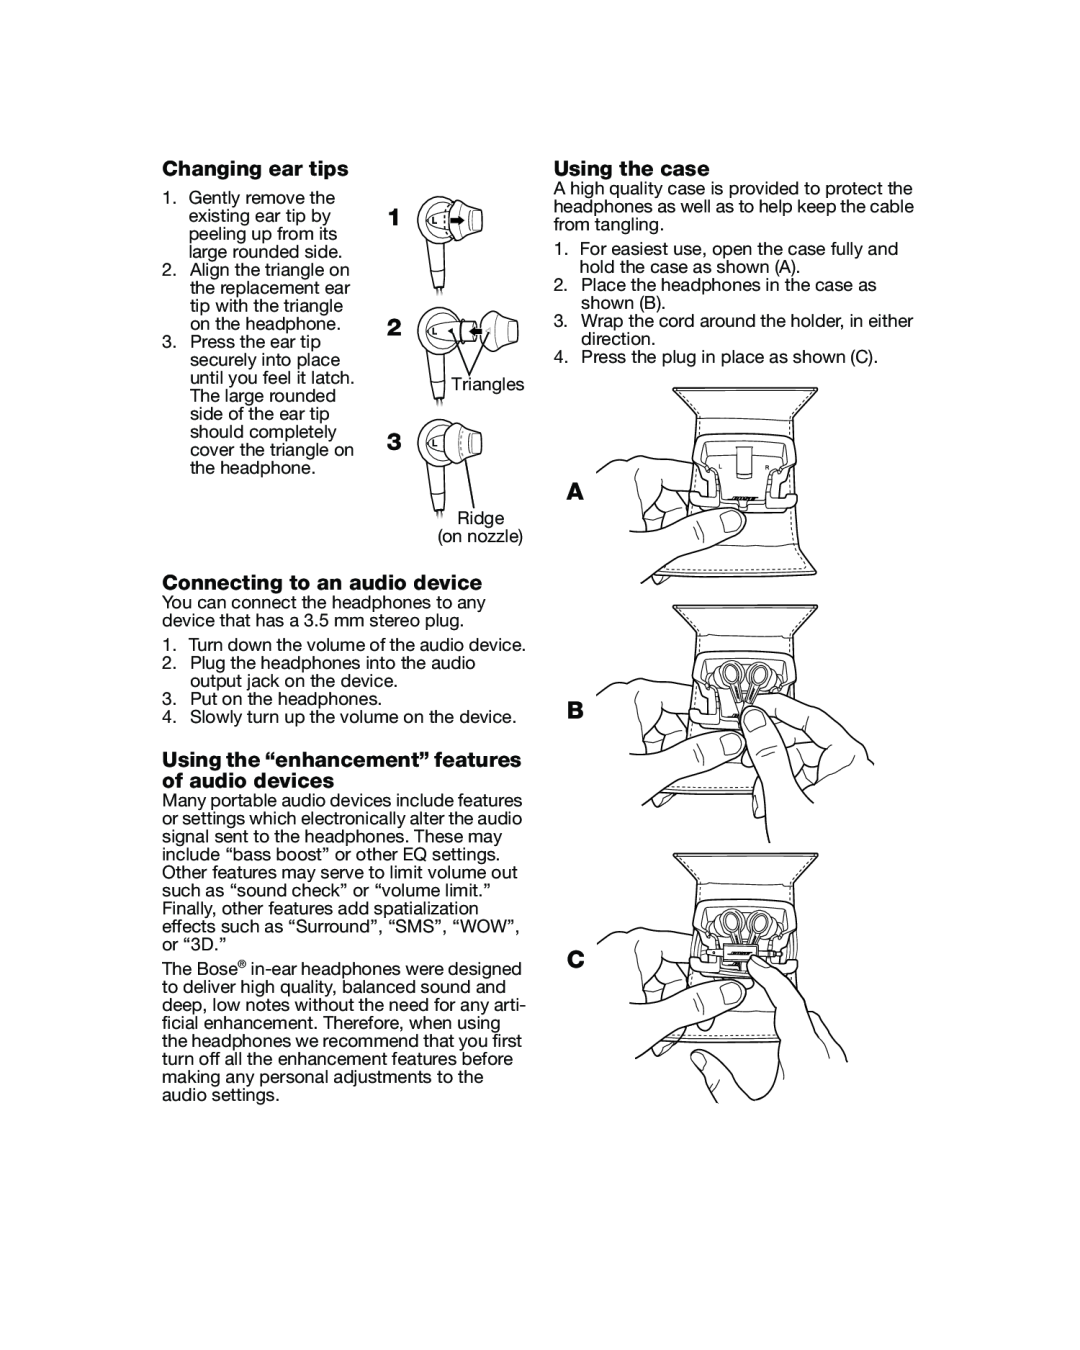 Bose in-ear headphone manual Changing ear tips, Using the case, Connecting to an audio device 